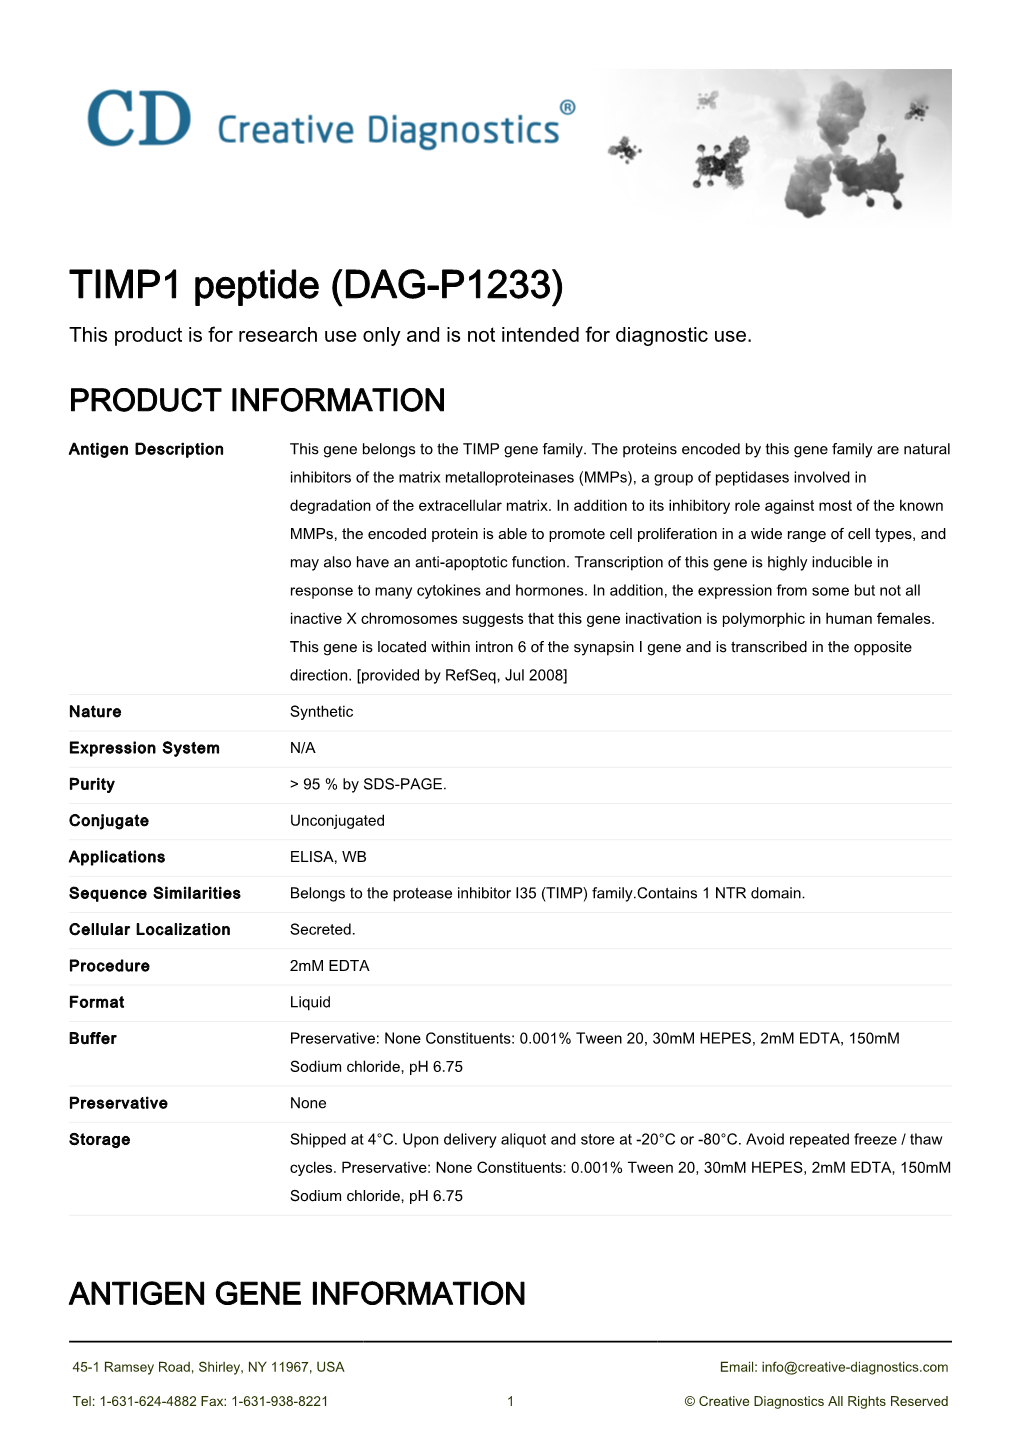 TIMP1 Peptide (DAG-P1233) This Product Is for Research Use Only and Is Not Intended for Diagnostic Use